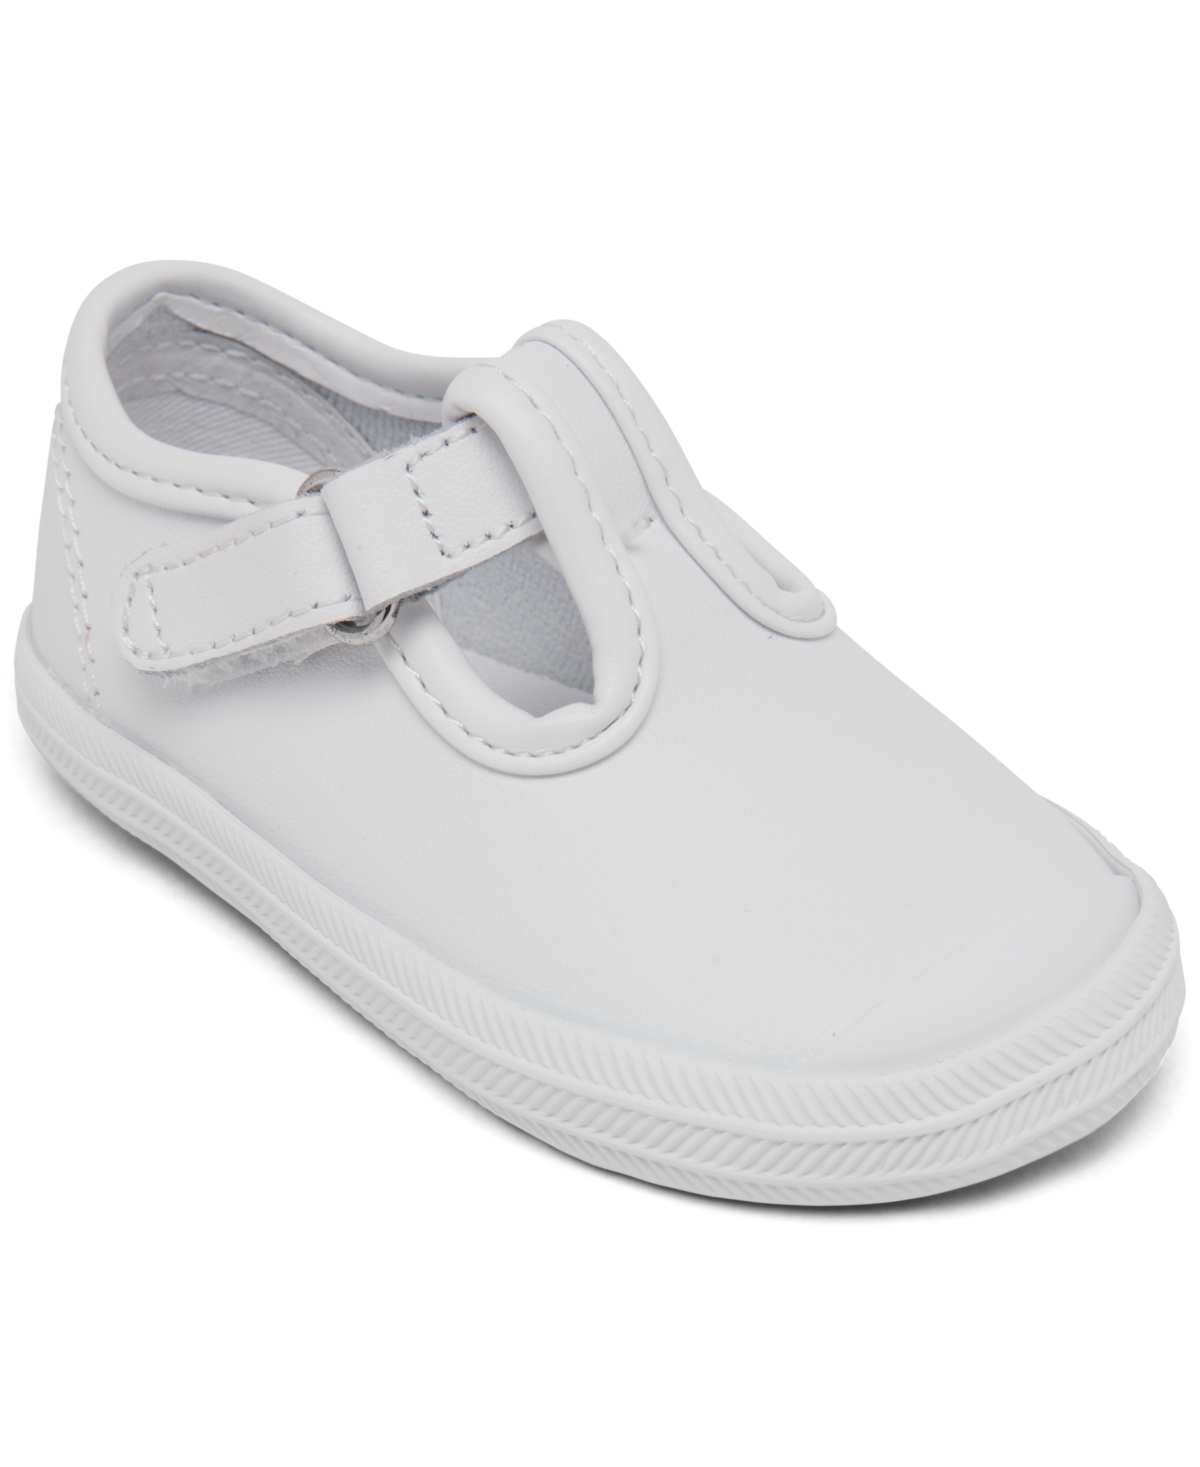 UPC 044214157143 product image for Keds Baby Girls' Champion Originals T-Strap Slip-On Casual Sneakers from Finish  | upcitemdb.com